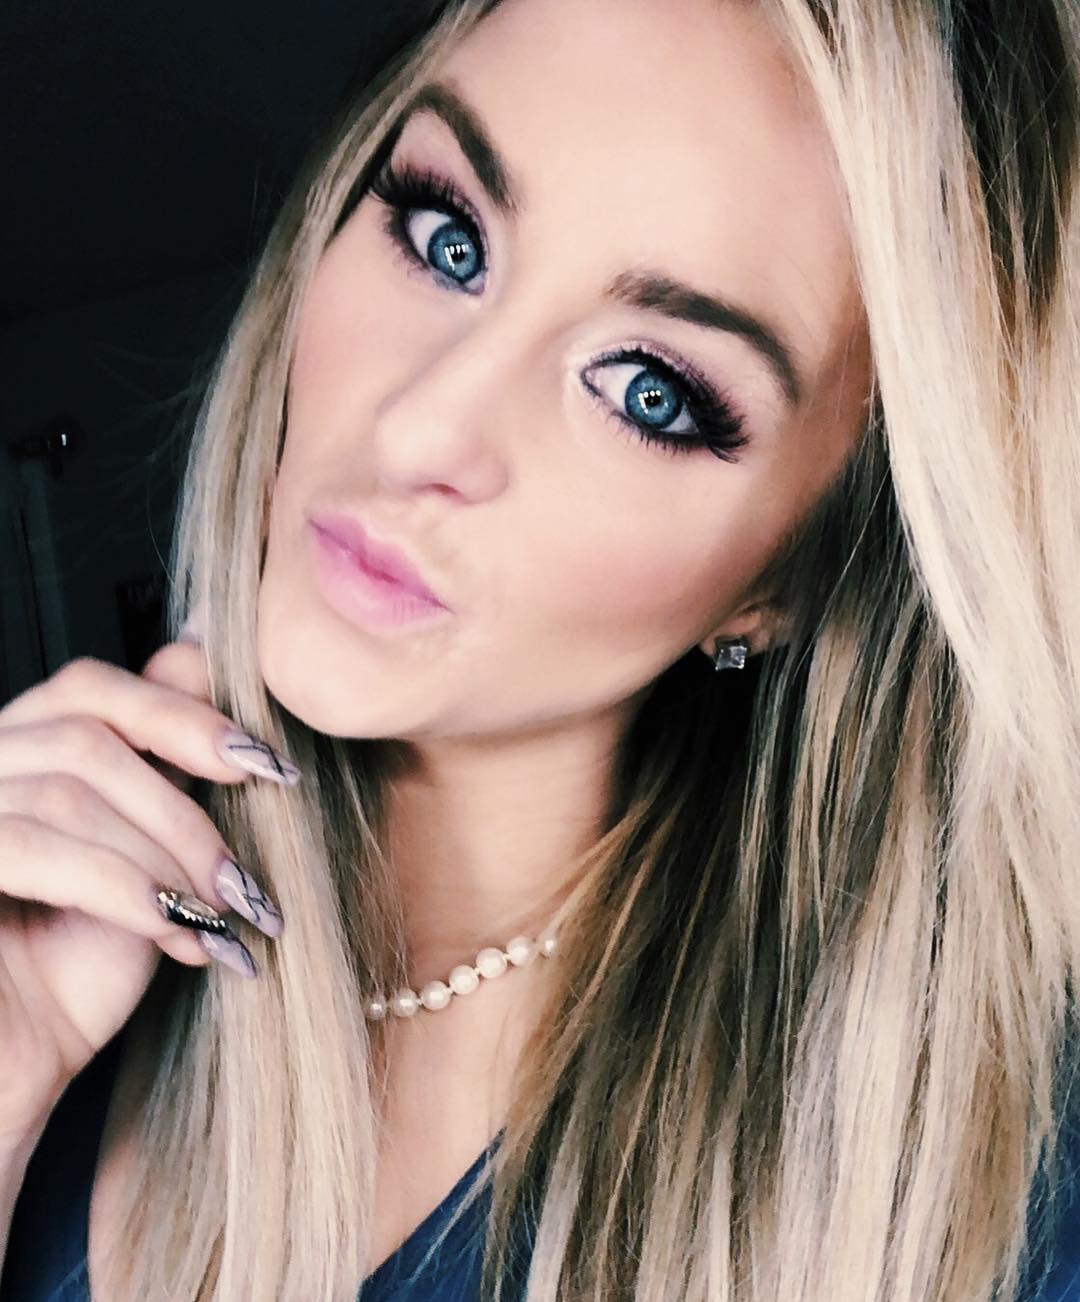 Teen Mom 2 S Leah Messer S Clapbacks See Her Responses To Backlash